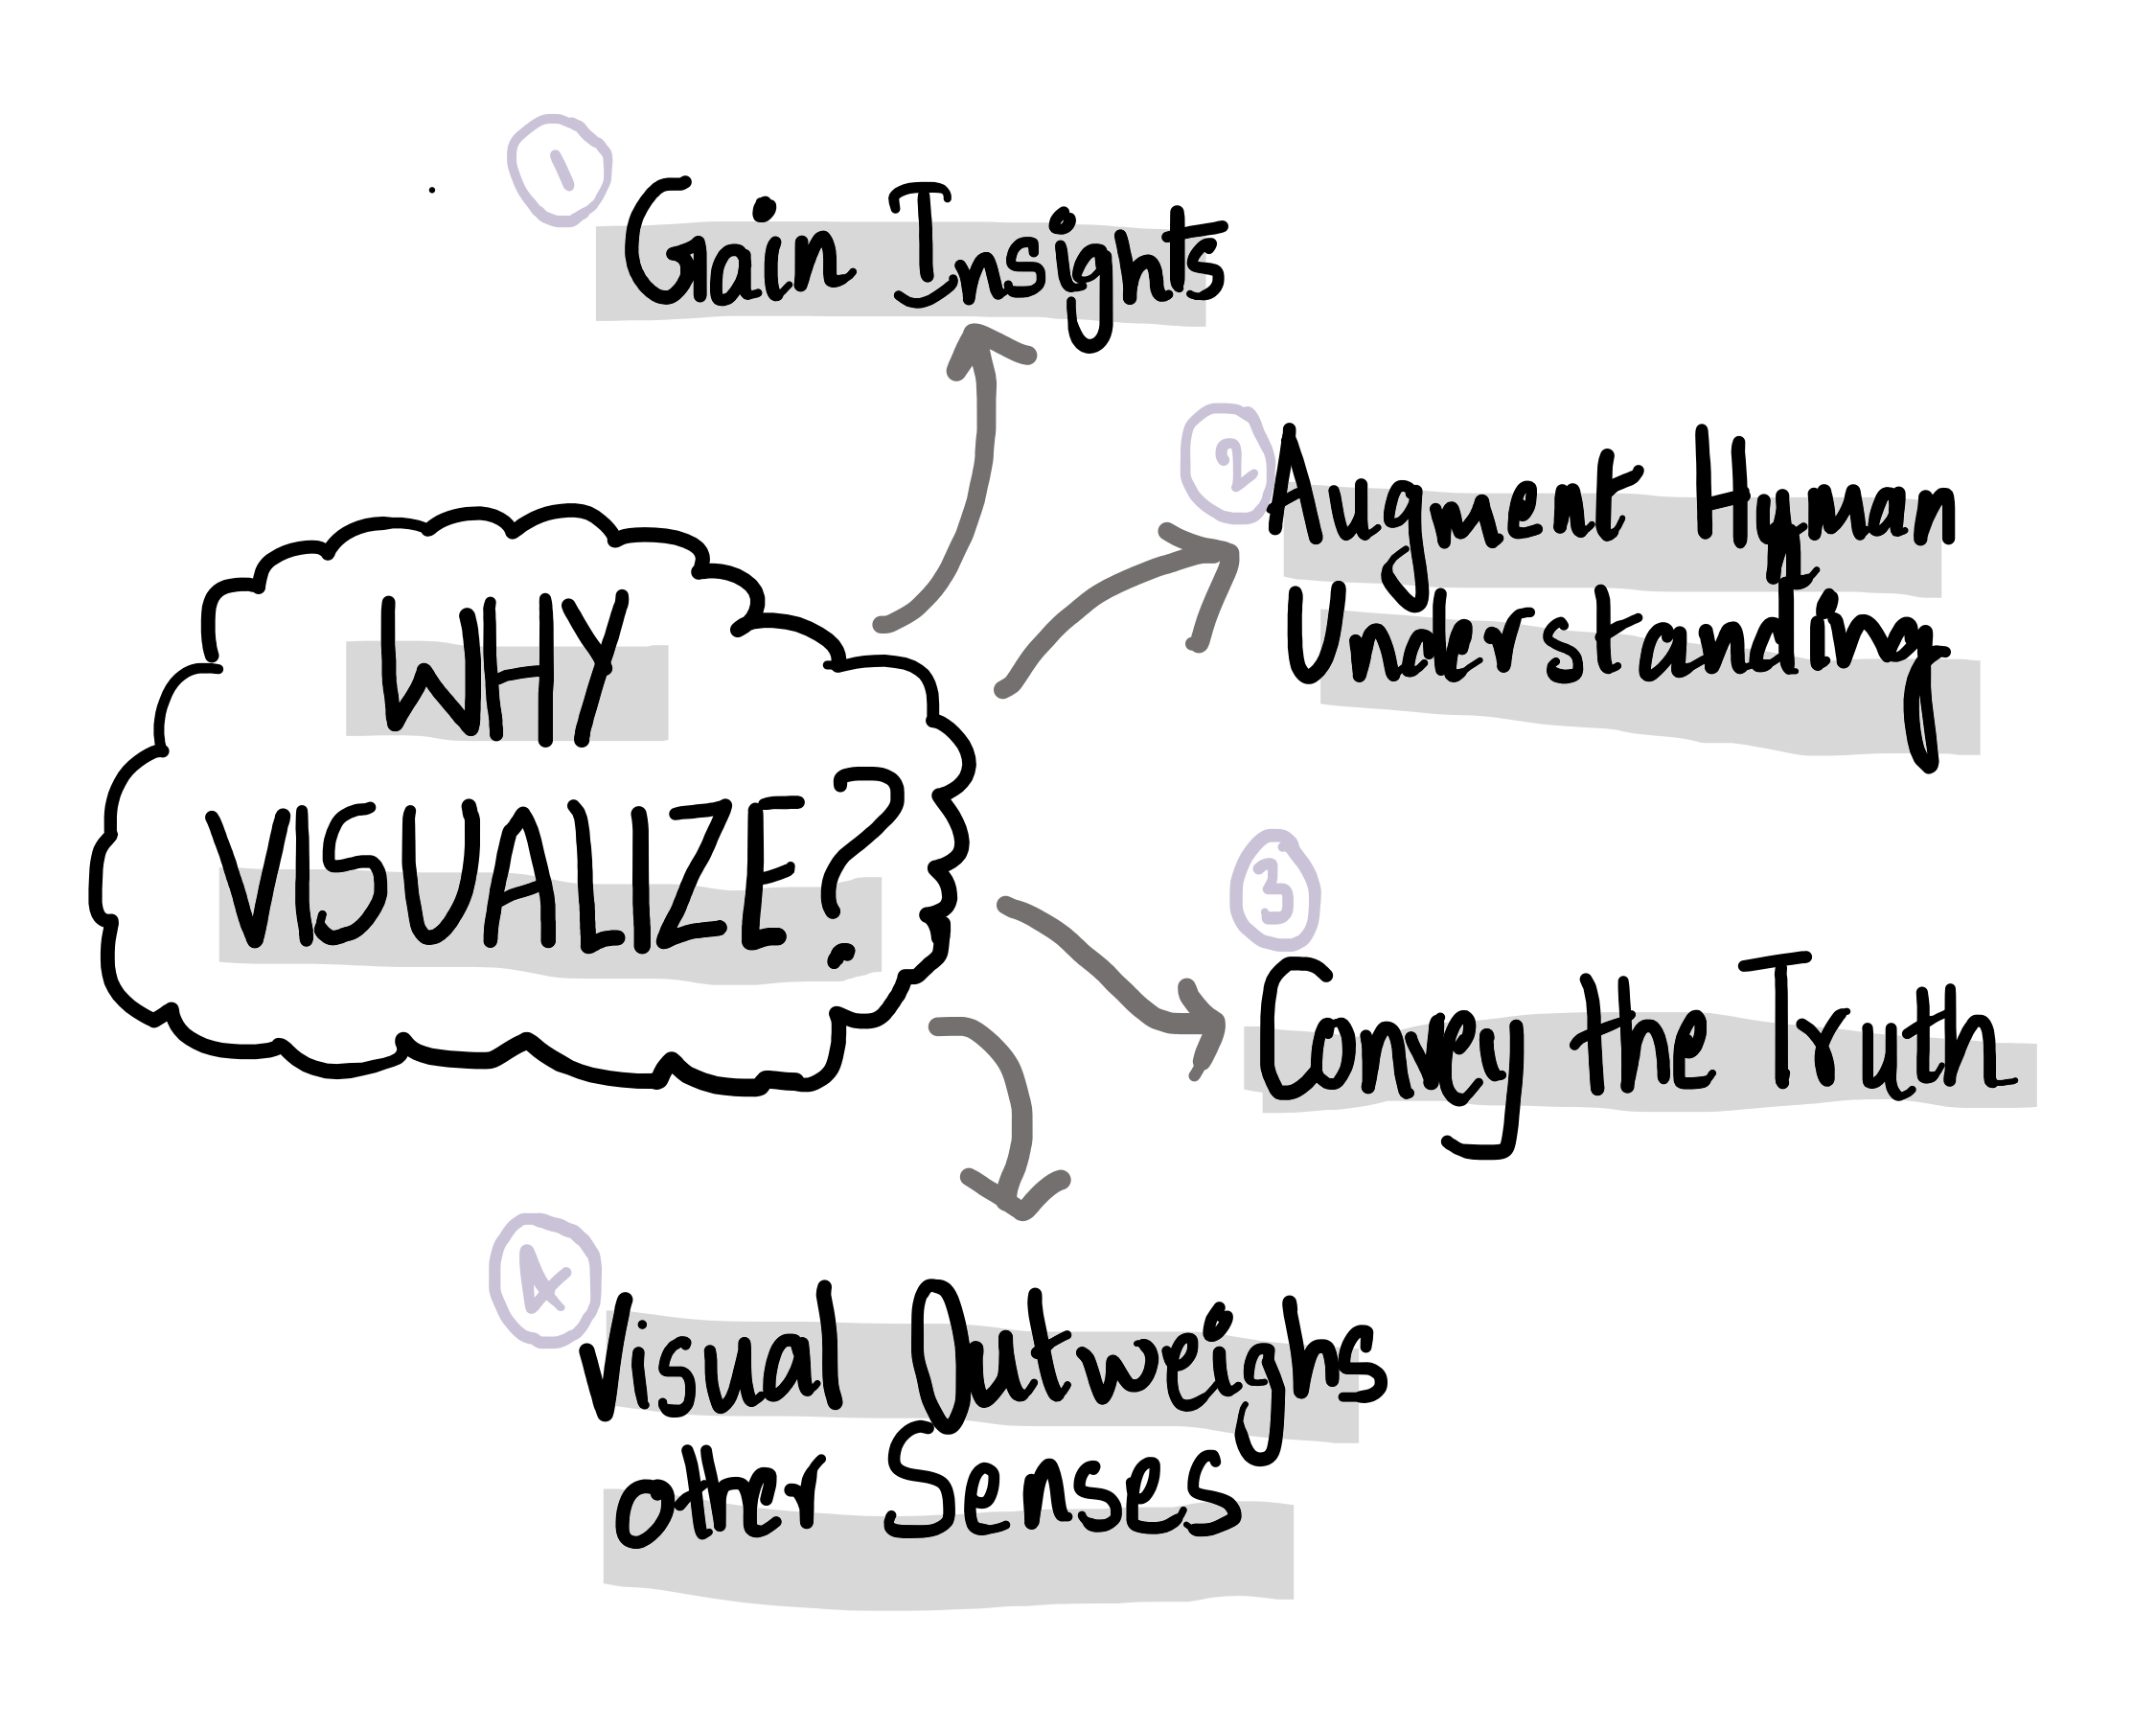 Why visualize: convey the truth, gain insight, visual outweighs other senses, augment human understanding